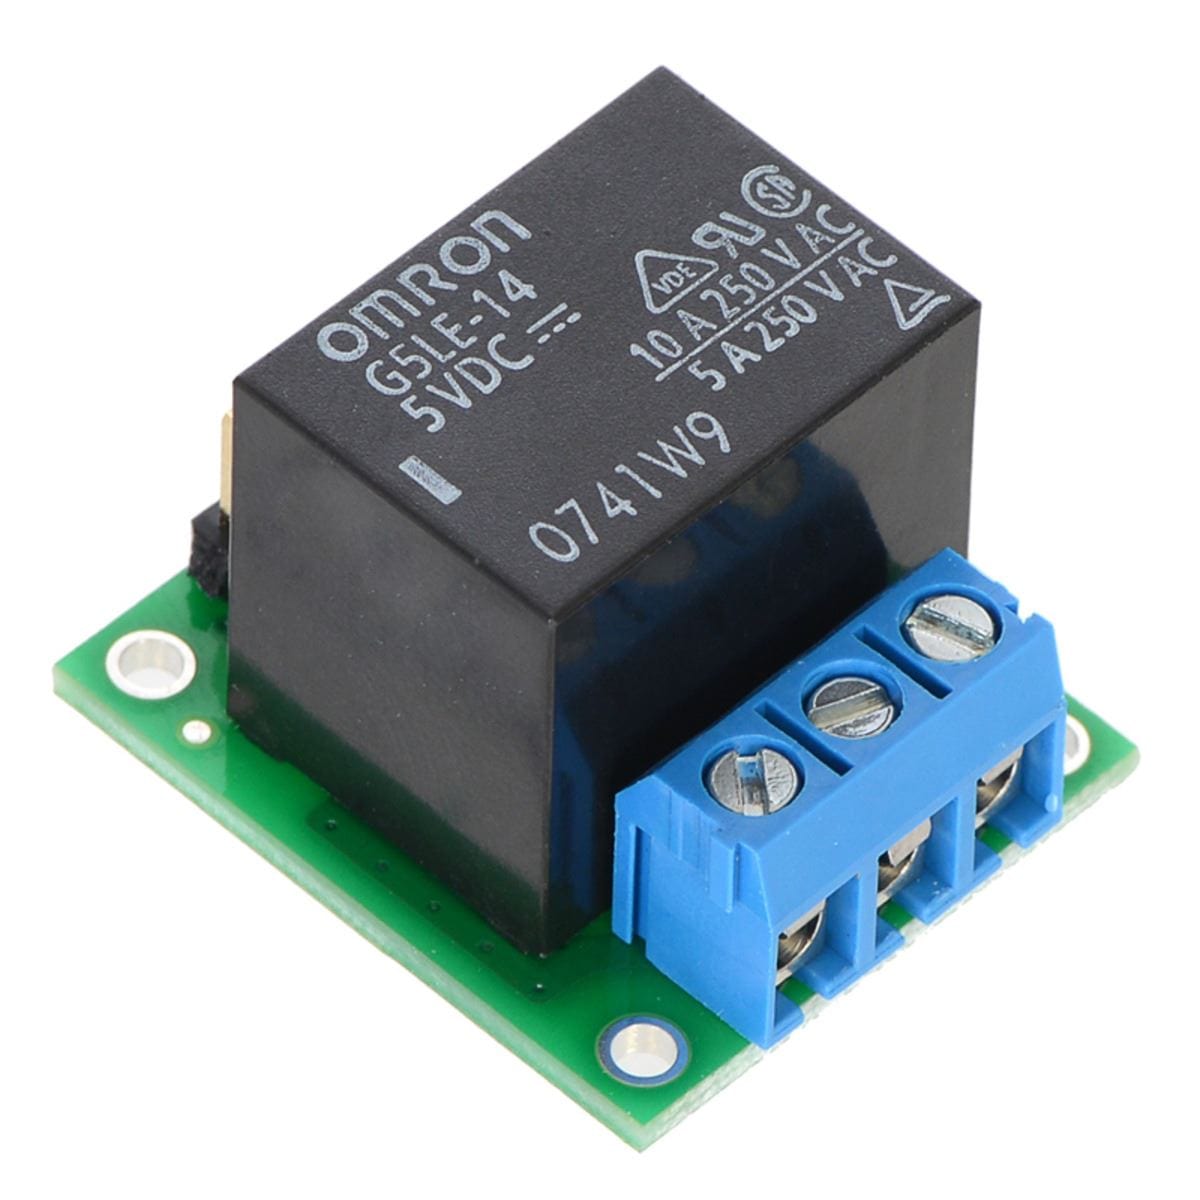 Pololu Basic SPDT Relay Carrier with 5VDC Relay (Assembled) - The Pi Hut